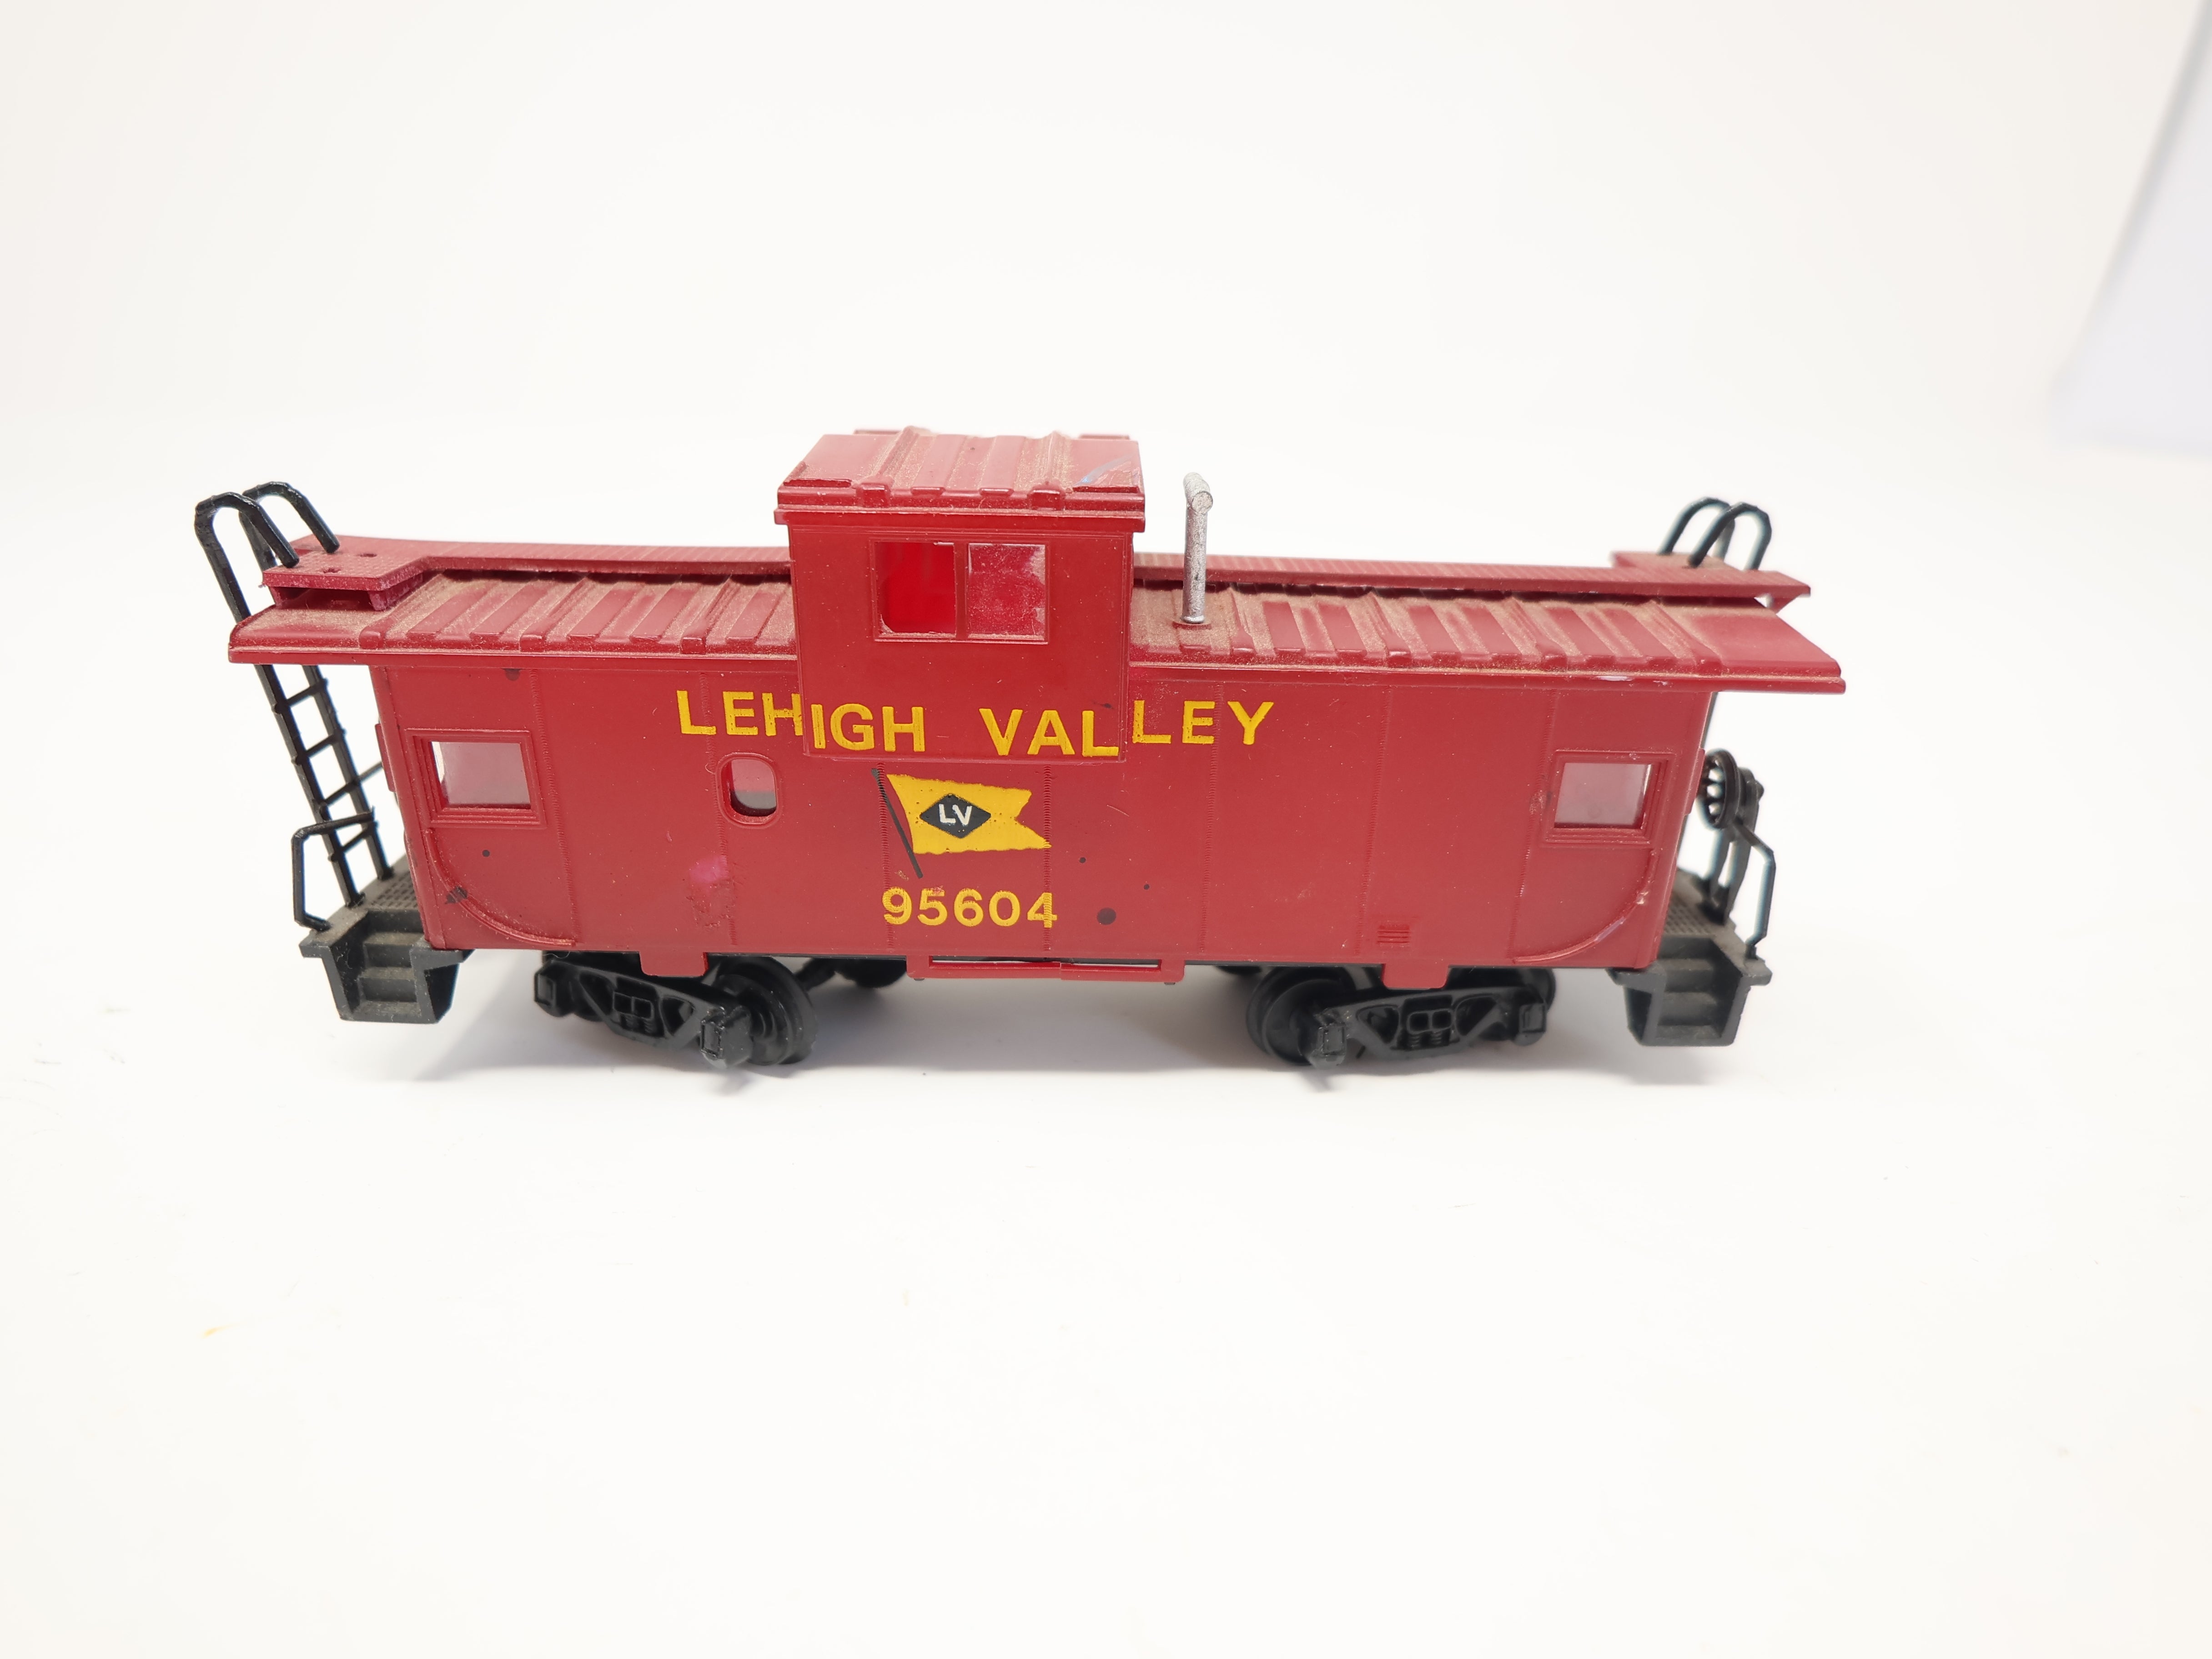 USED Bachmann HO Scale, Caboose, Lehigh Valley LV #95604, Rough